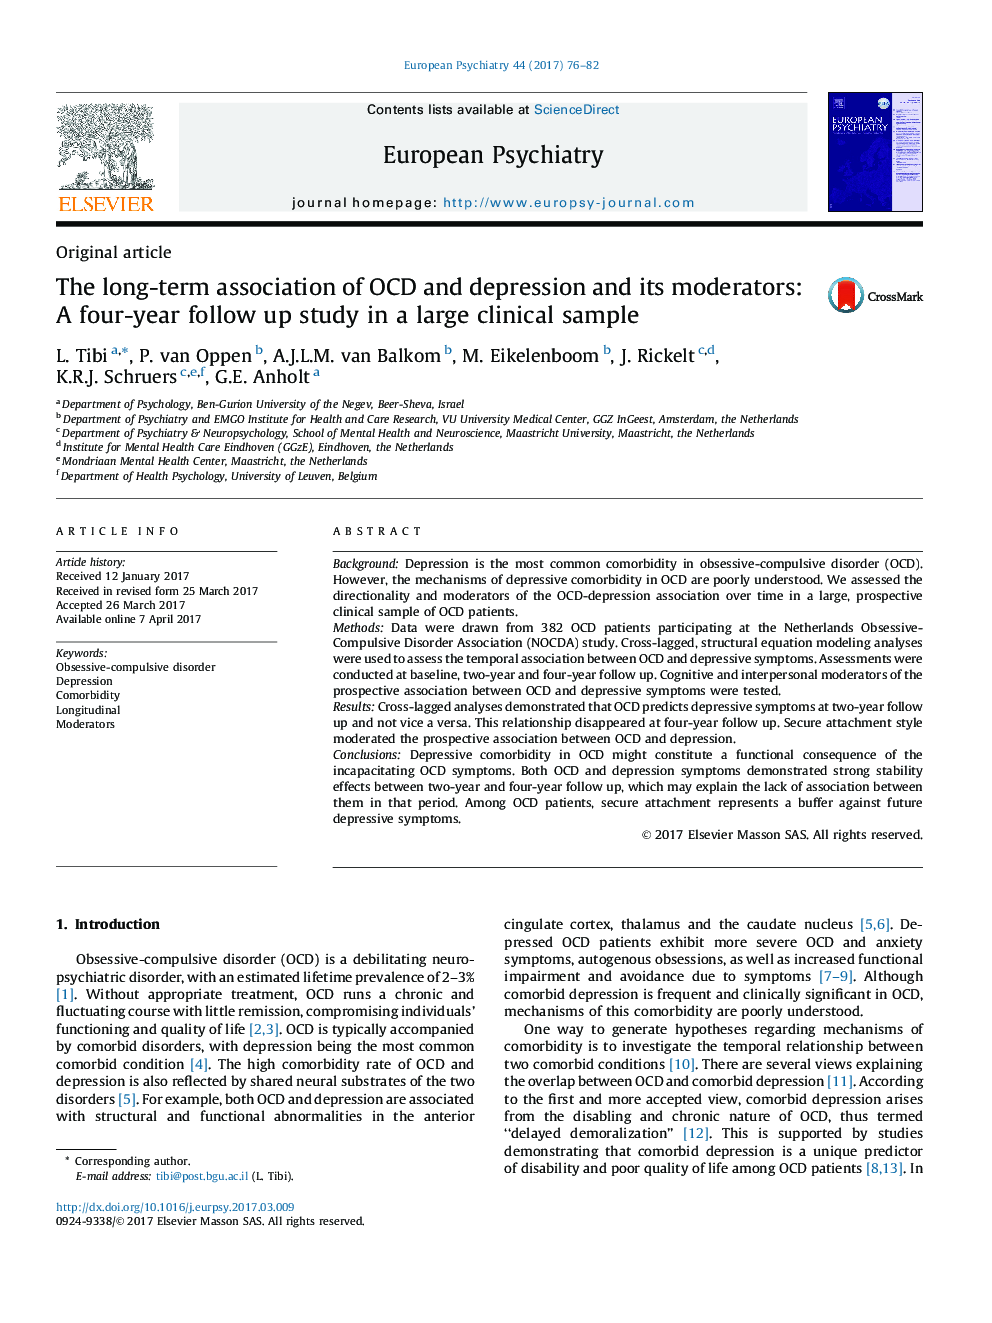 Original articleThe long-term association of OCD and depression and its moderators: A four-year follow up study in a large clinical sample